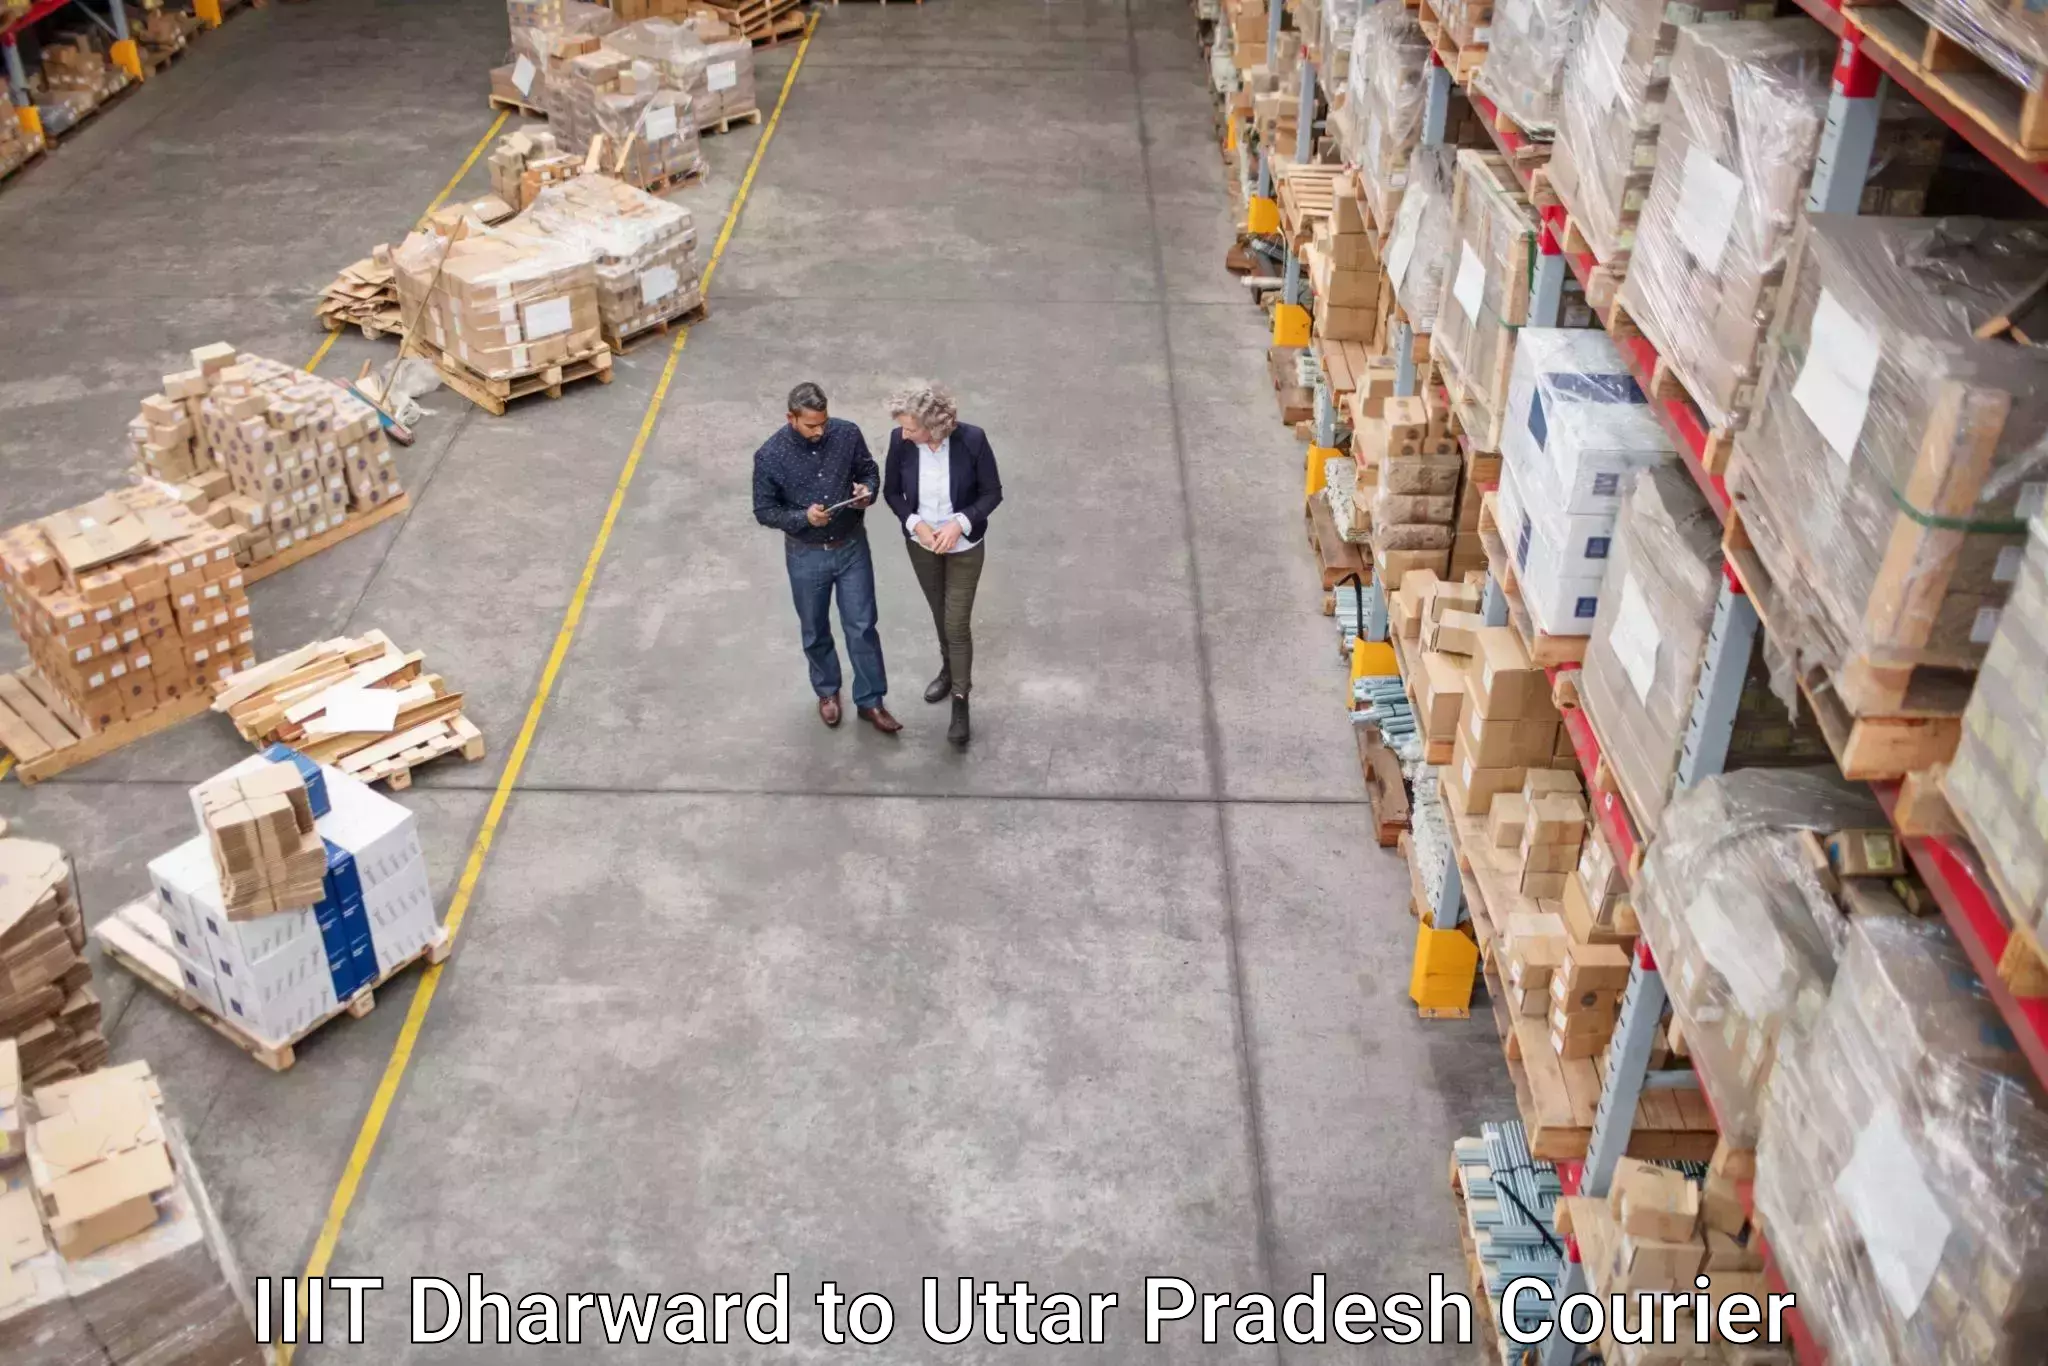 Advanced courier platforms IIIT Dharward to Sikriganj